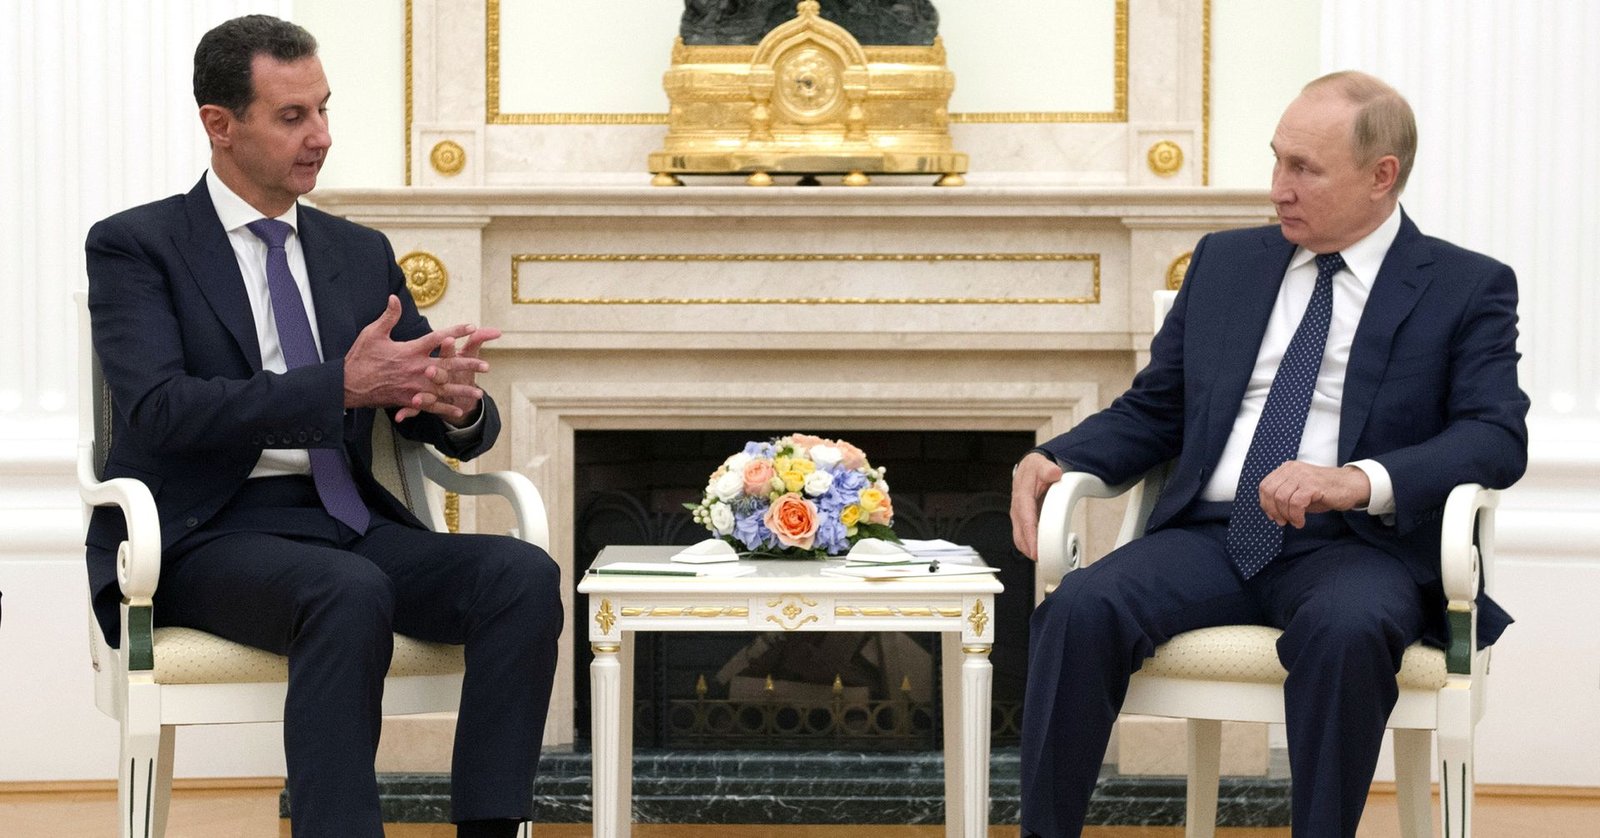 RUSSIAN PRESIDENT Vladimir Putin meets with Syrian President Bashar Assad in Moscow in September | Report Focus News